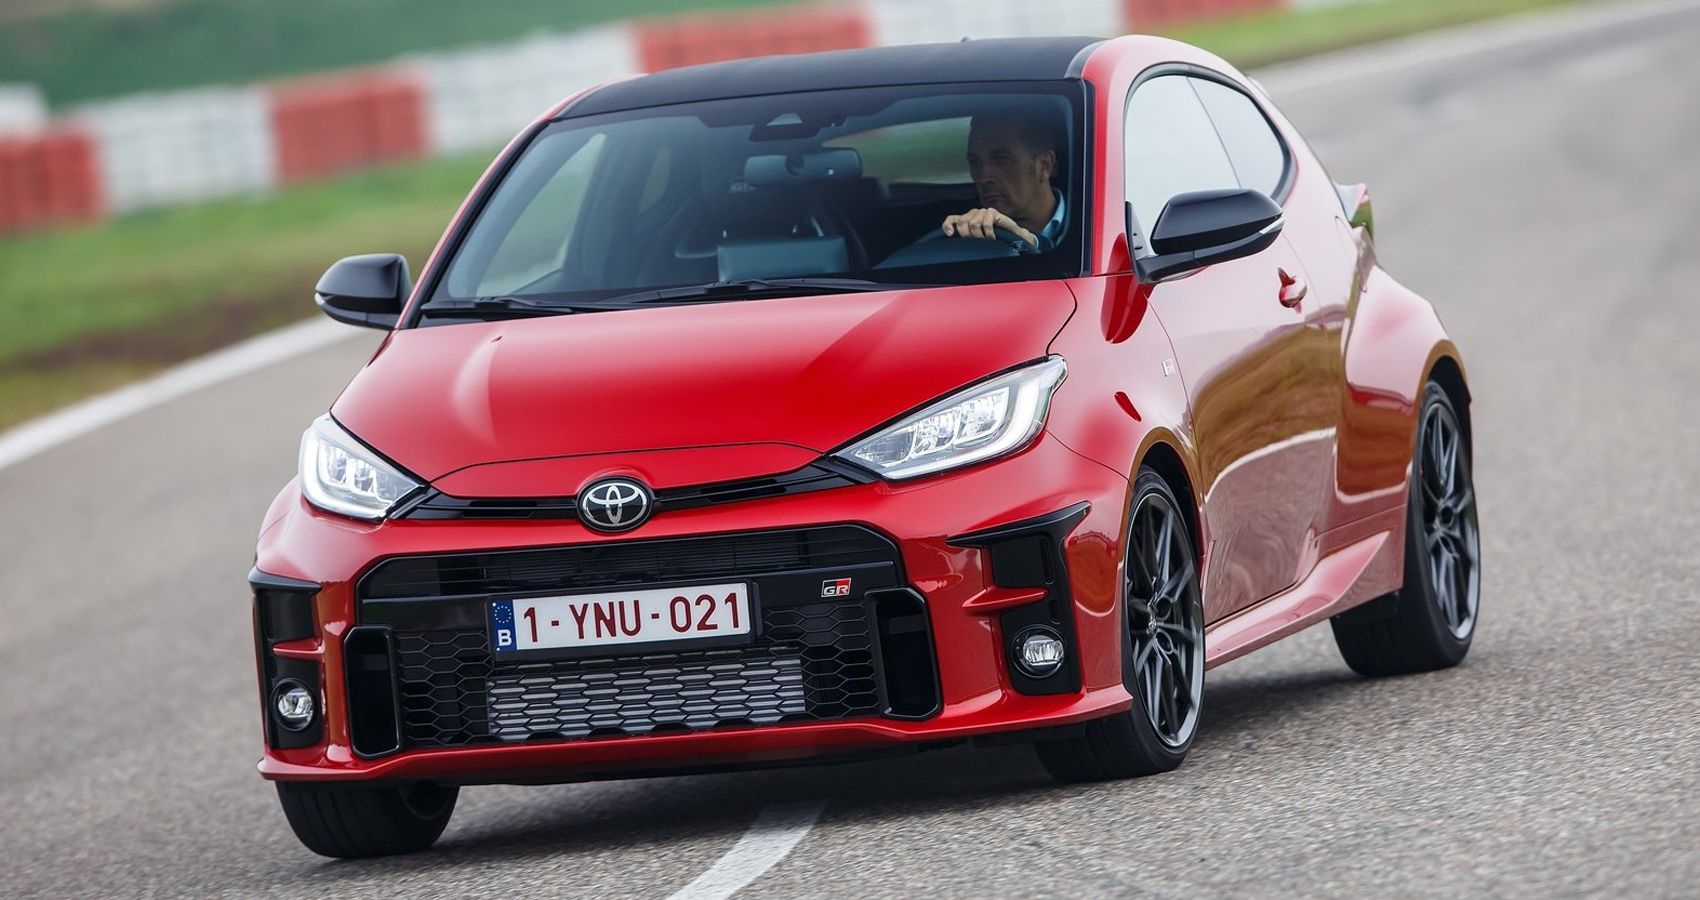 The front of a red GR Yaris cornering on the race track